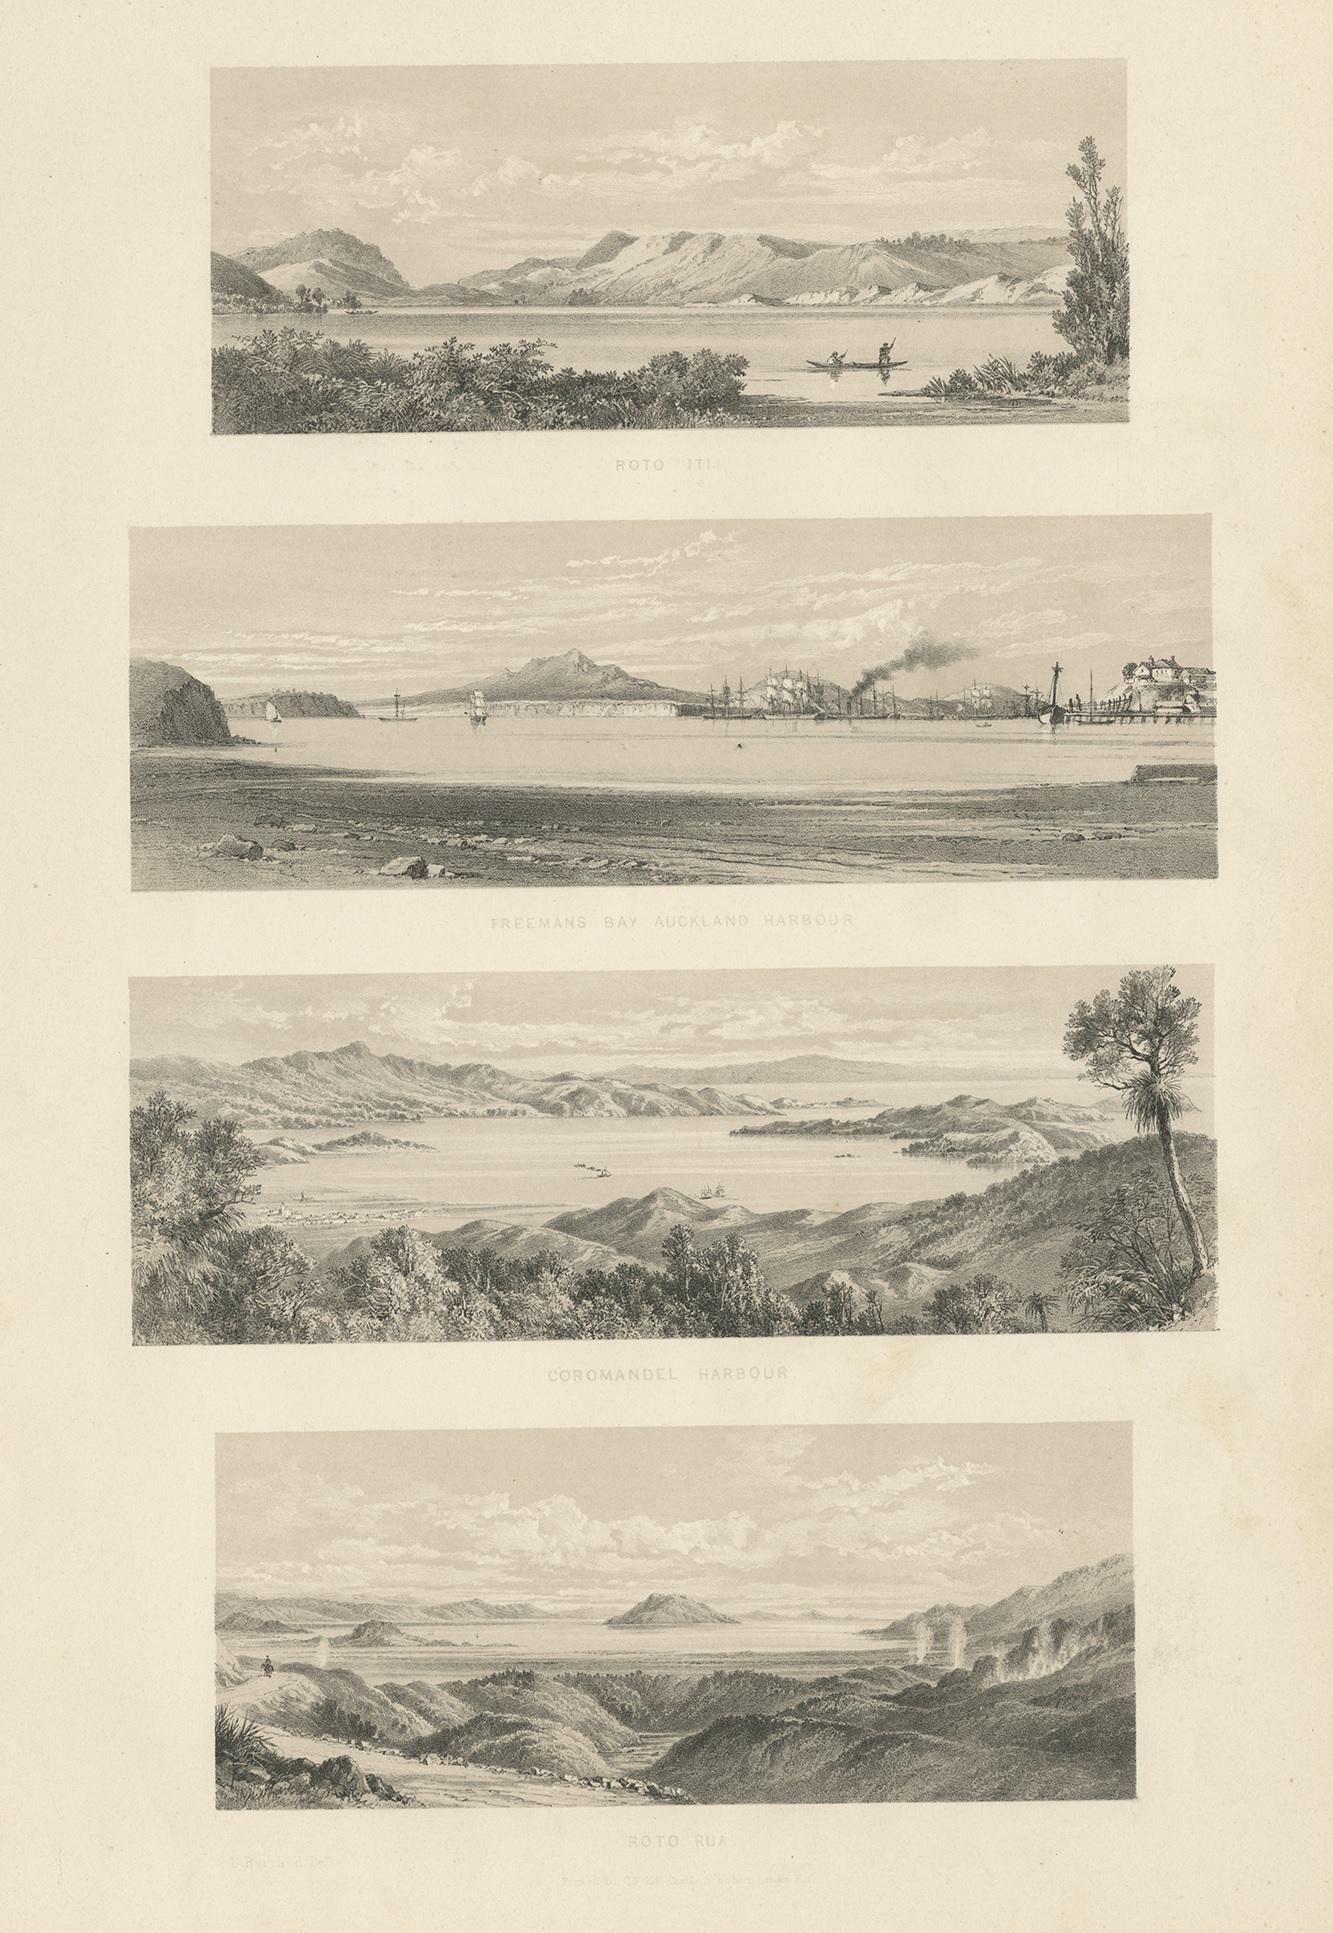 Antique print titled 'Roto Iti - Freemans Bay Auckland Harbour - Coromandel Harbour - Roto Rua'. Various views of New Zealand. Lithographed by C.F. Kell after drawings by Barraud. This print originates from 'New Zealand: Graphic and Descriptive',